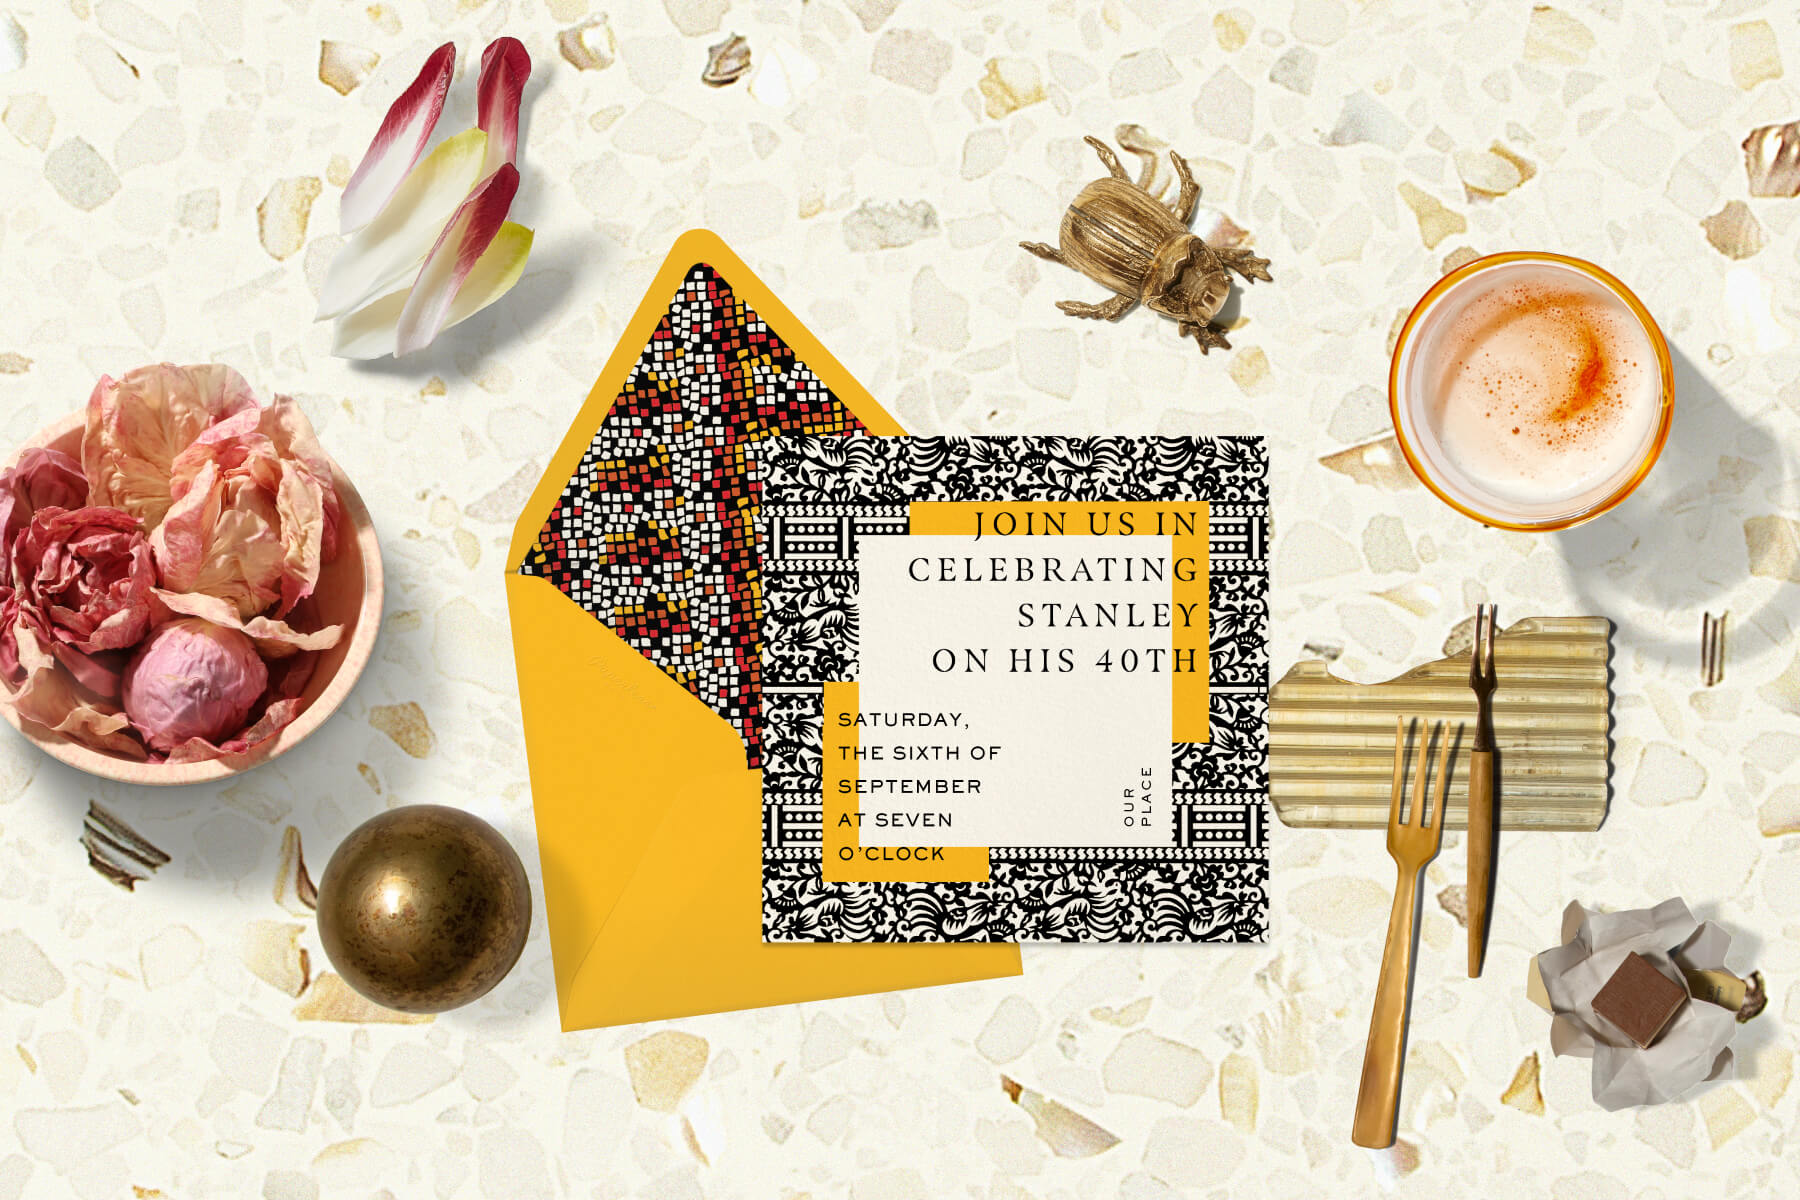 A Duro Olowu digital invitation with a black, white, and yellow patterned frame and a matching yellow envelope with a black, white, red, and yellow geometric pattern. The invitation is surrounded by objects like a brass ball, a cocktail, forks, and lettuces.